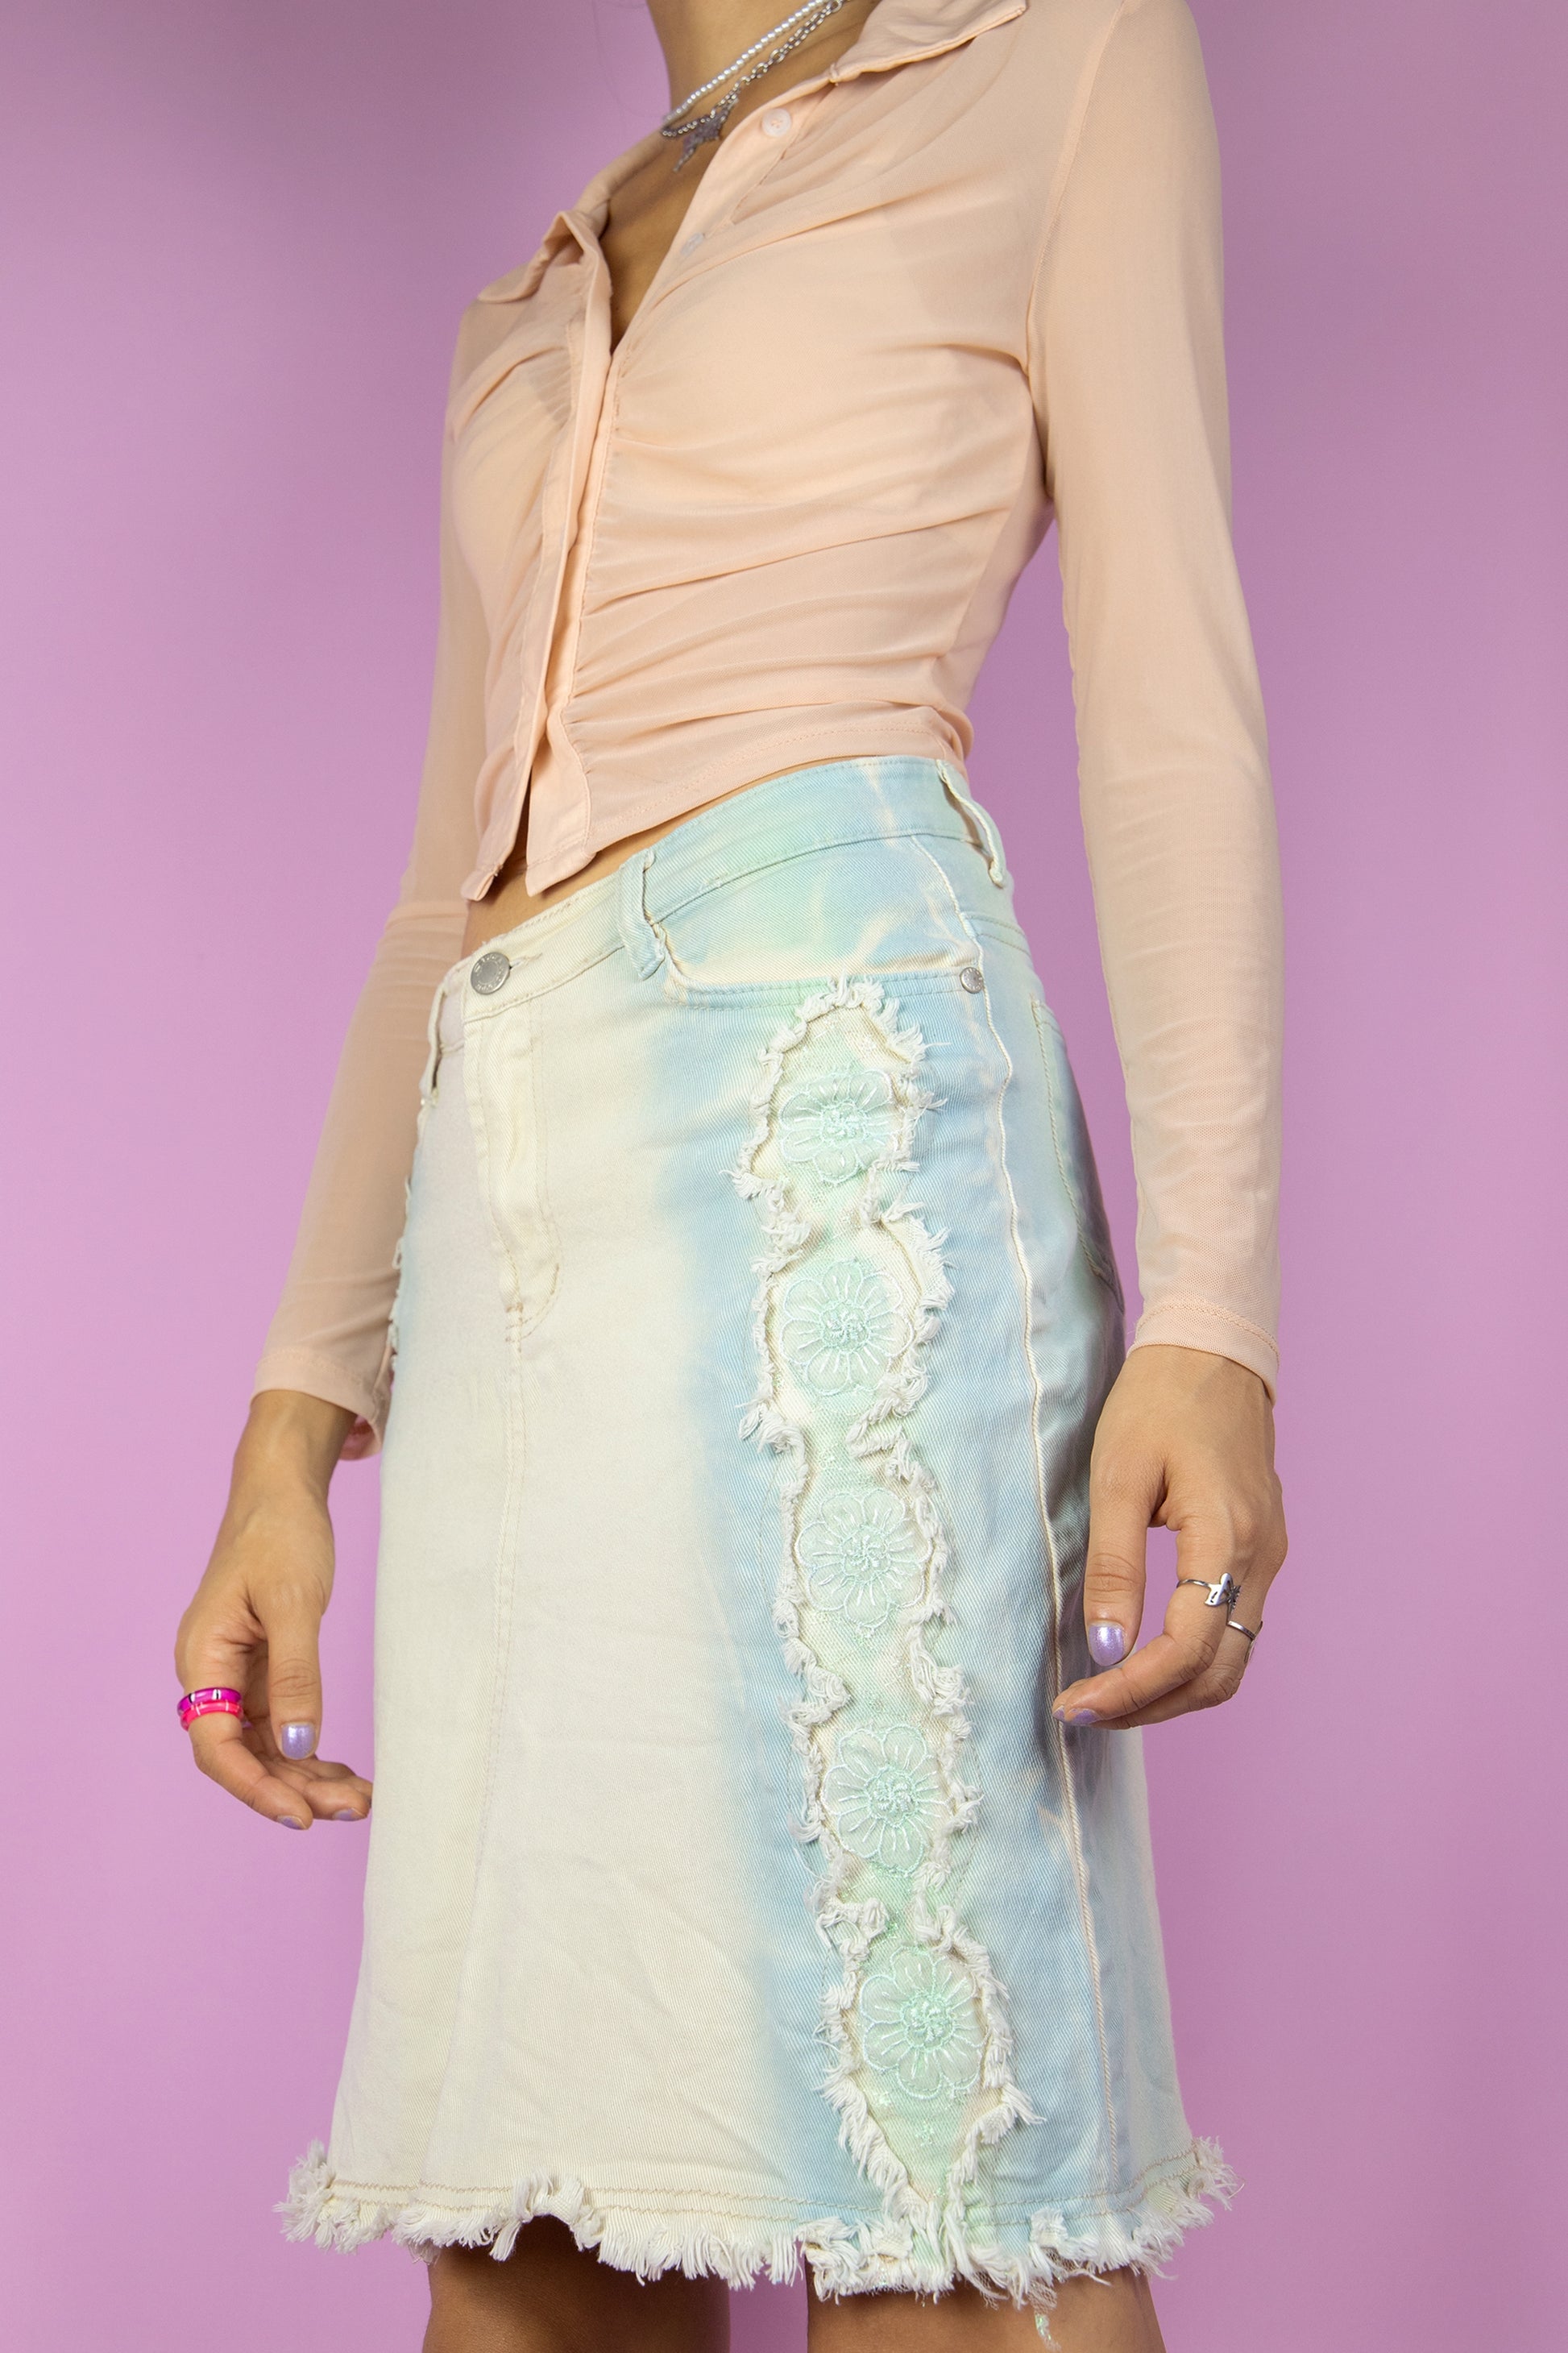 The Y2K Beige Denim Mini Skirt is a vintage beige and blue stretch skirt with frayed edges and floral appliqué details. Cyber 2000s jean mini skirt.